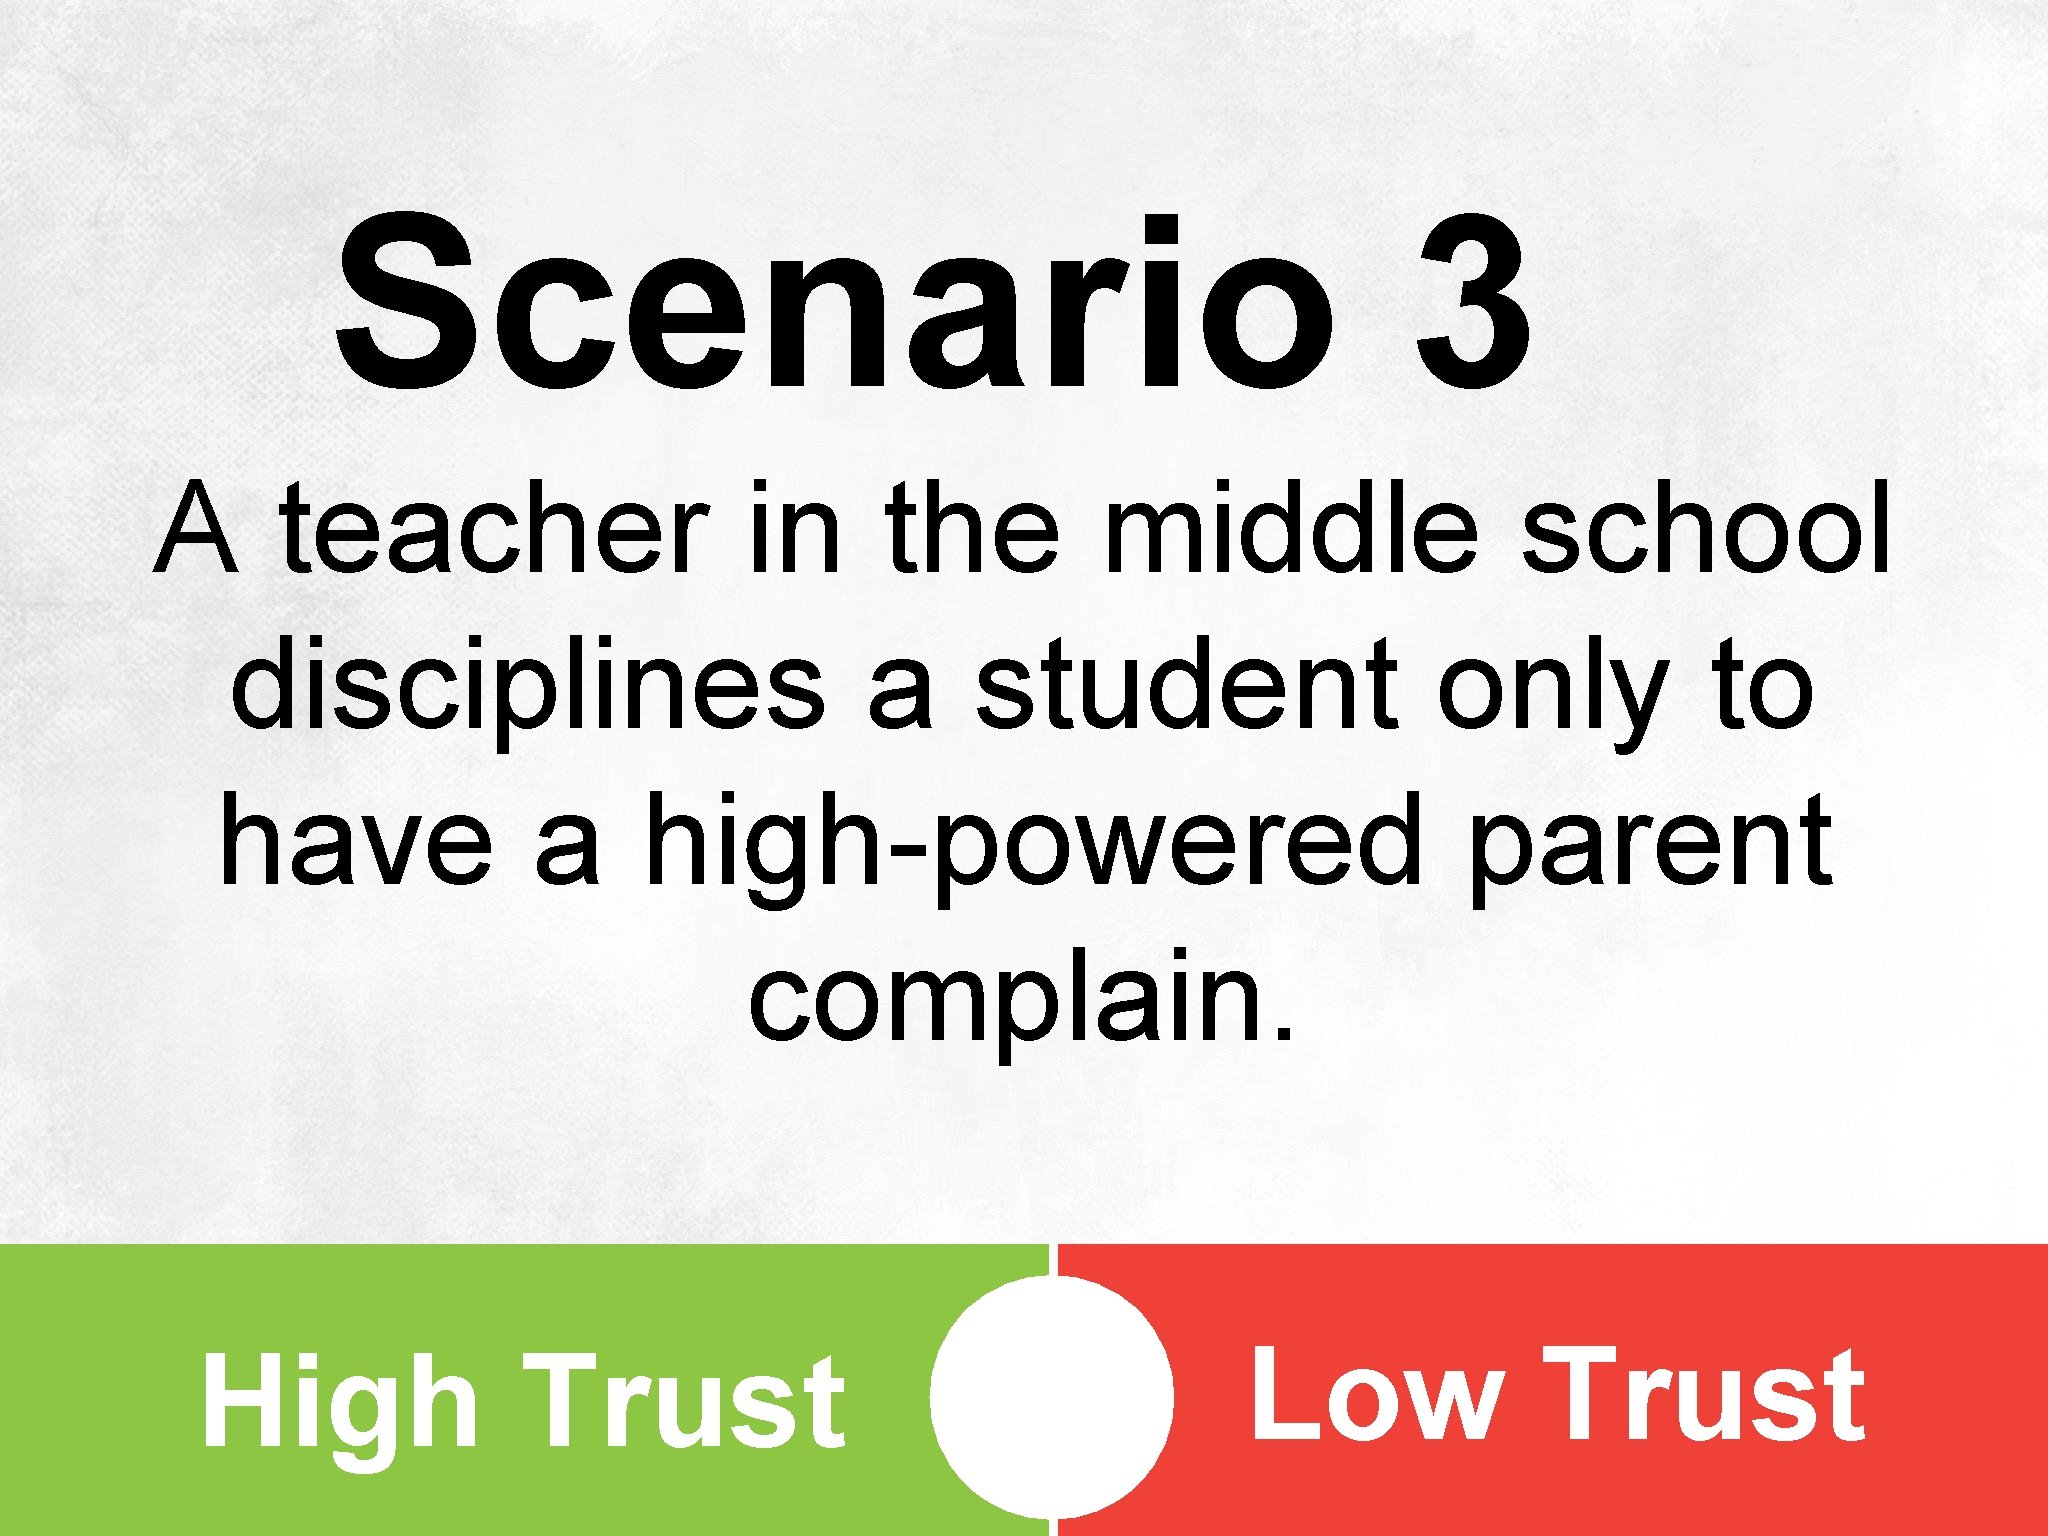 Scenario 3 A teacher in the middle school disciplines a student only to have